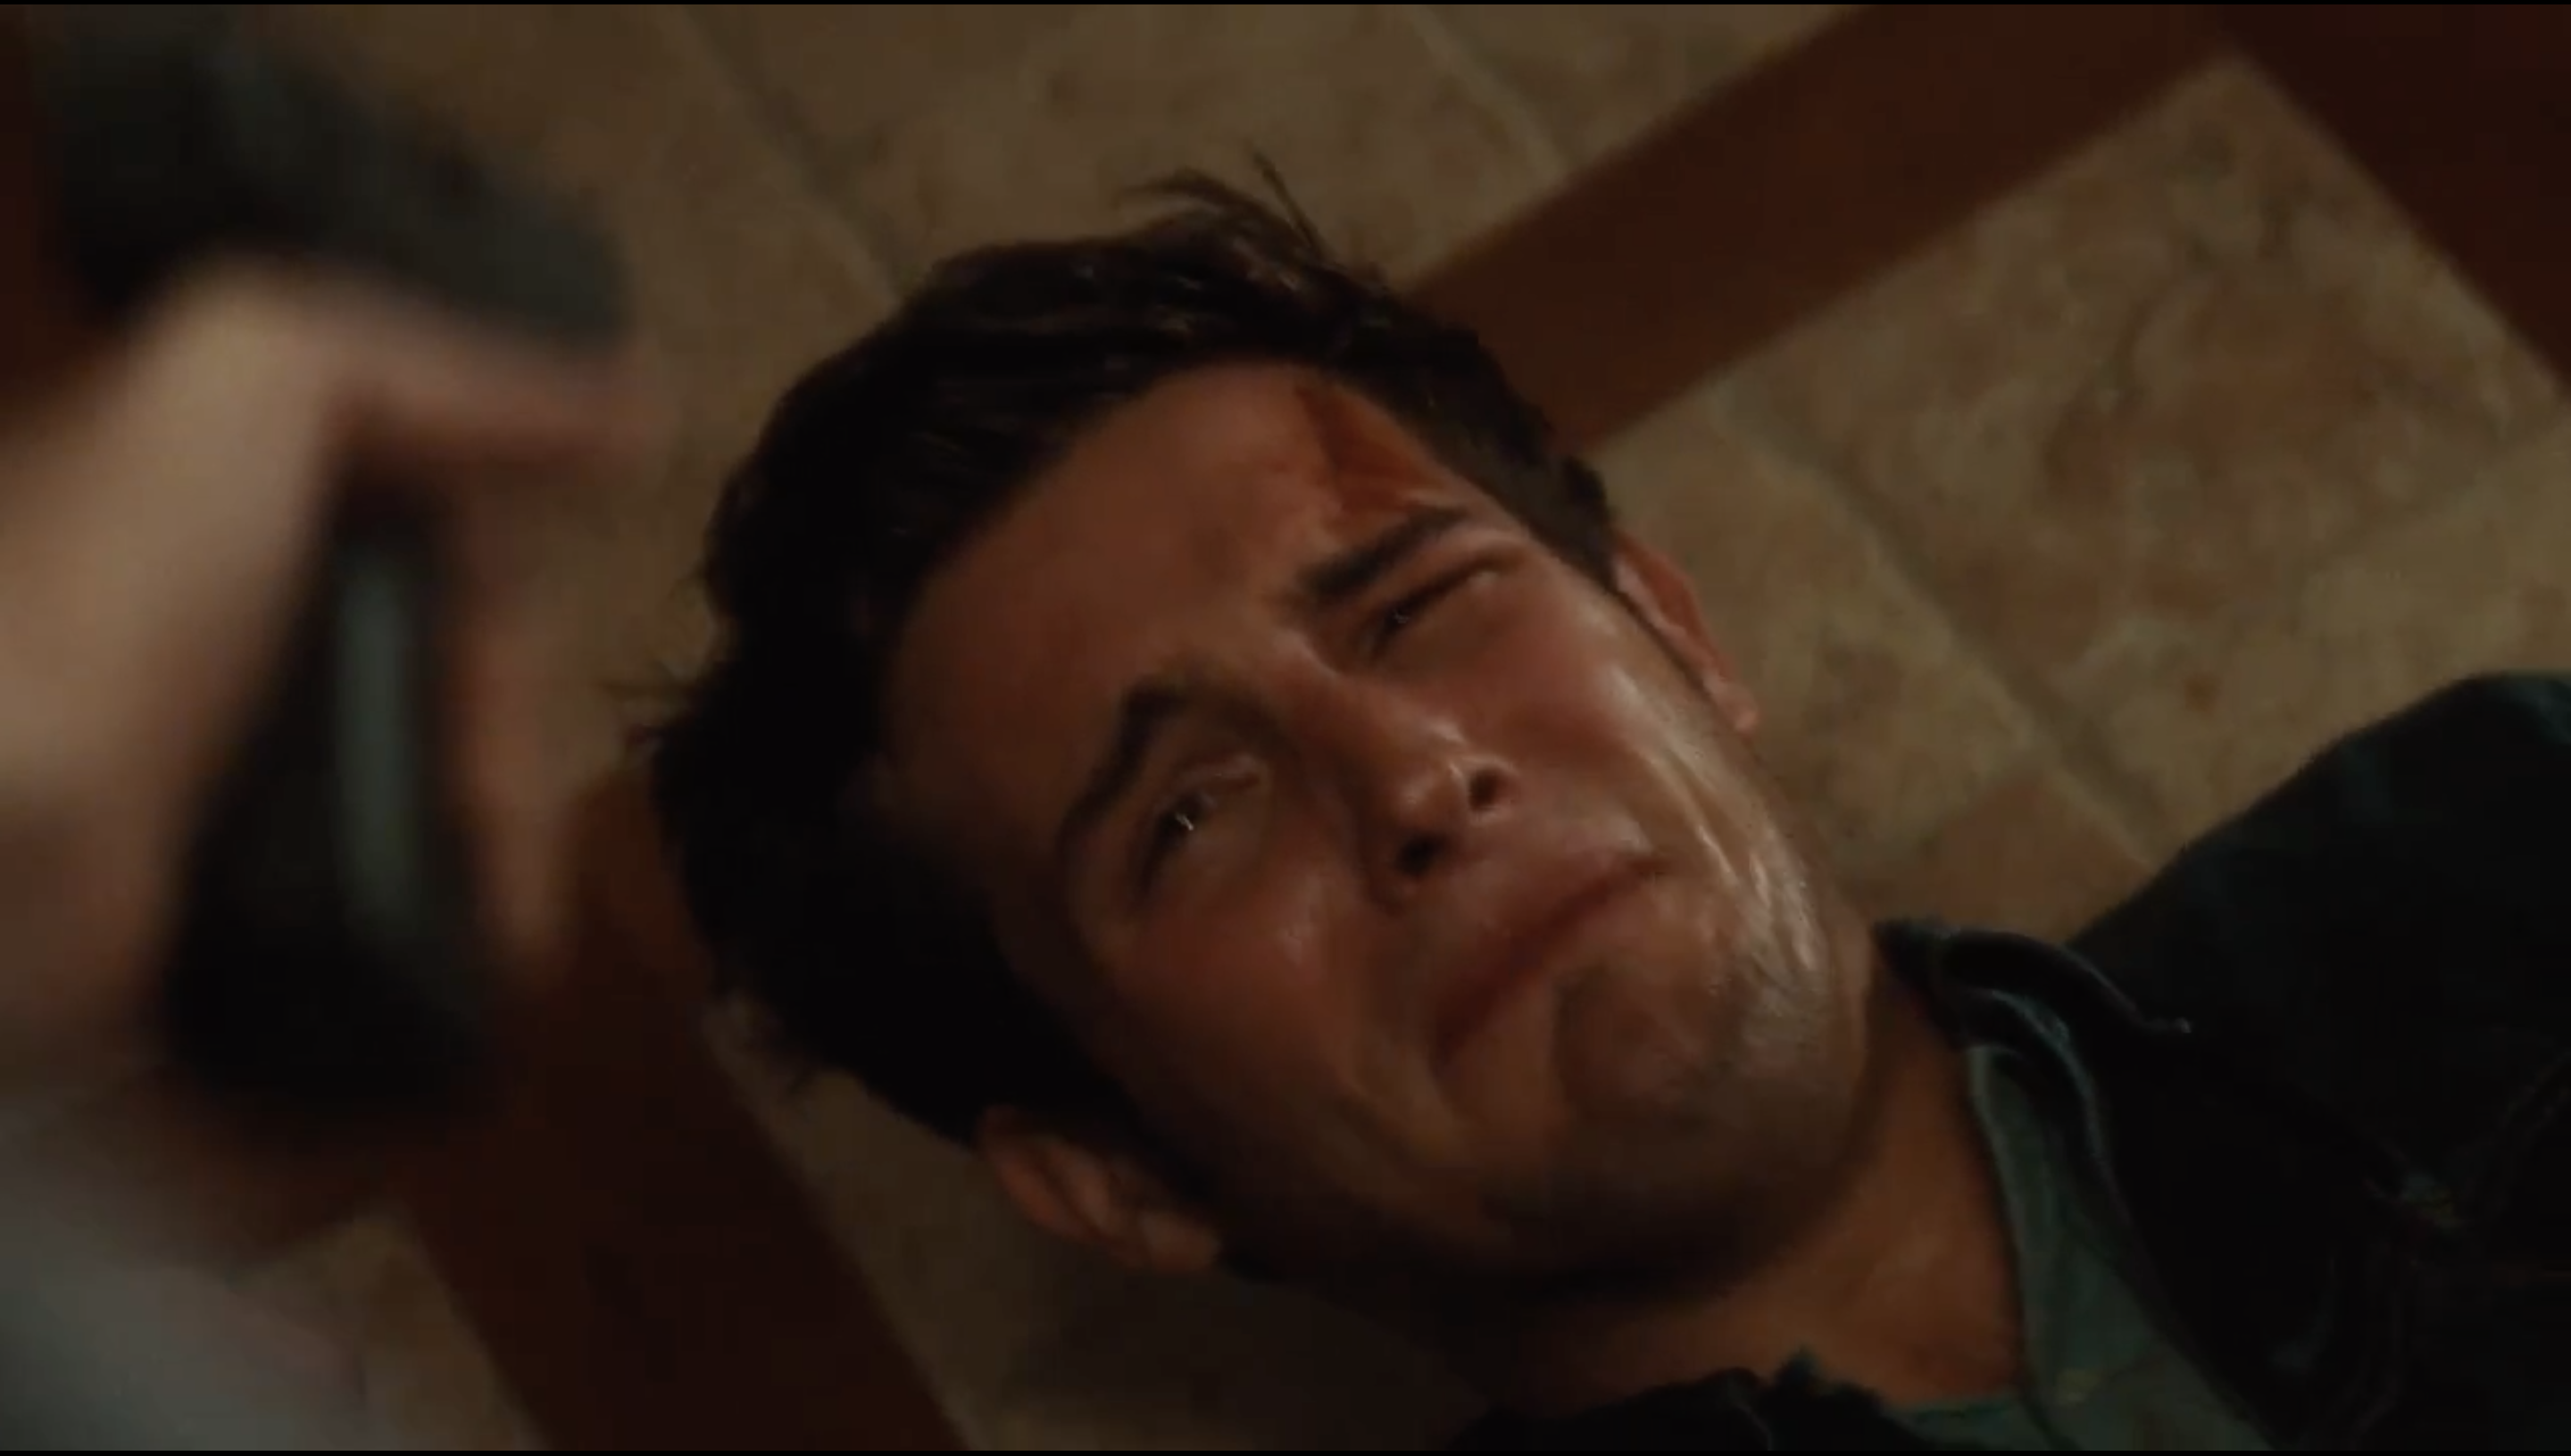 Nico Tortorella lies on the floor with a gun pointed at his head